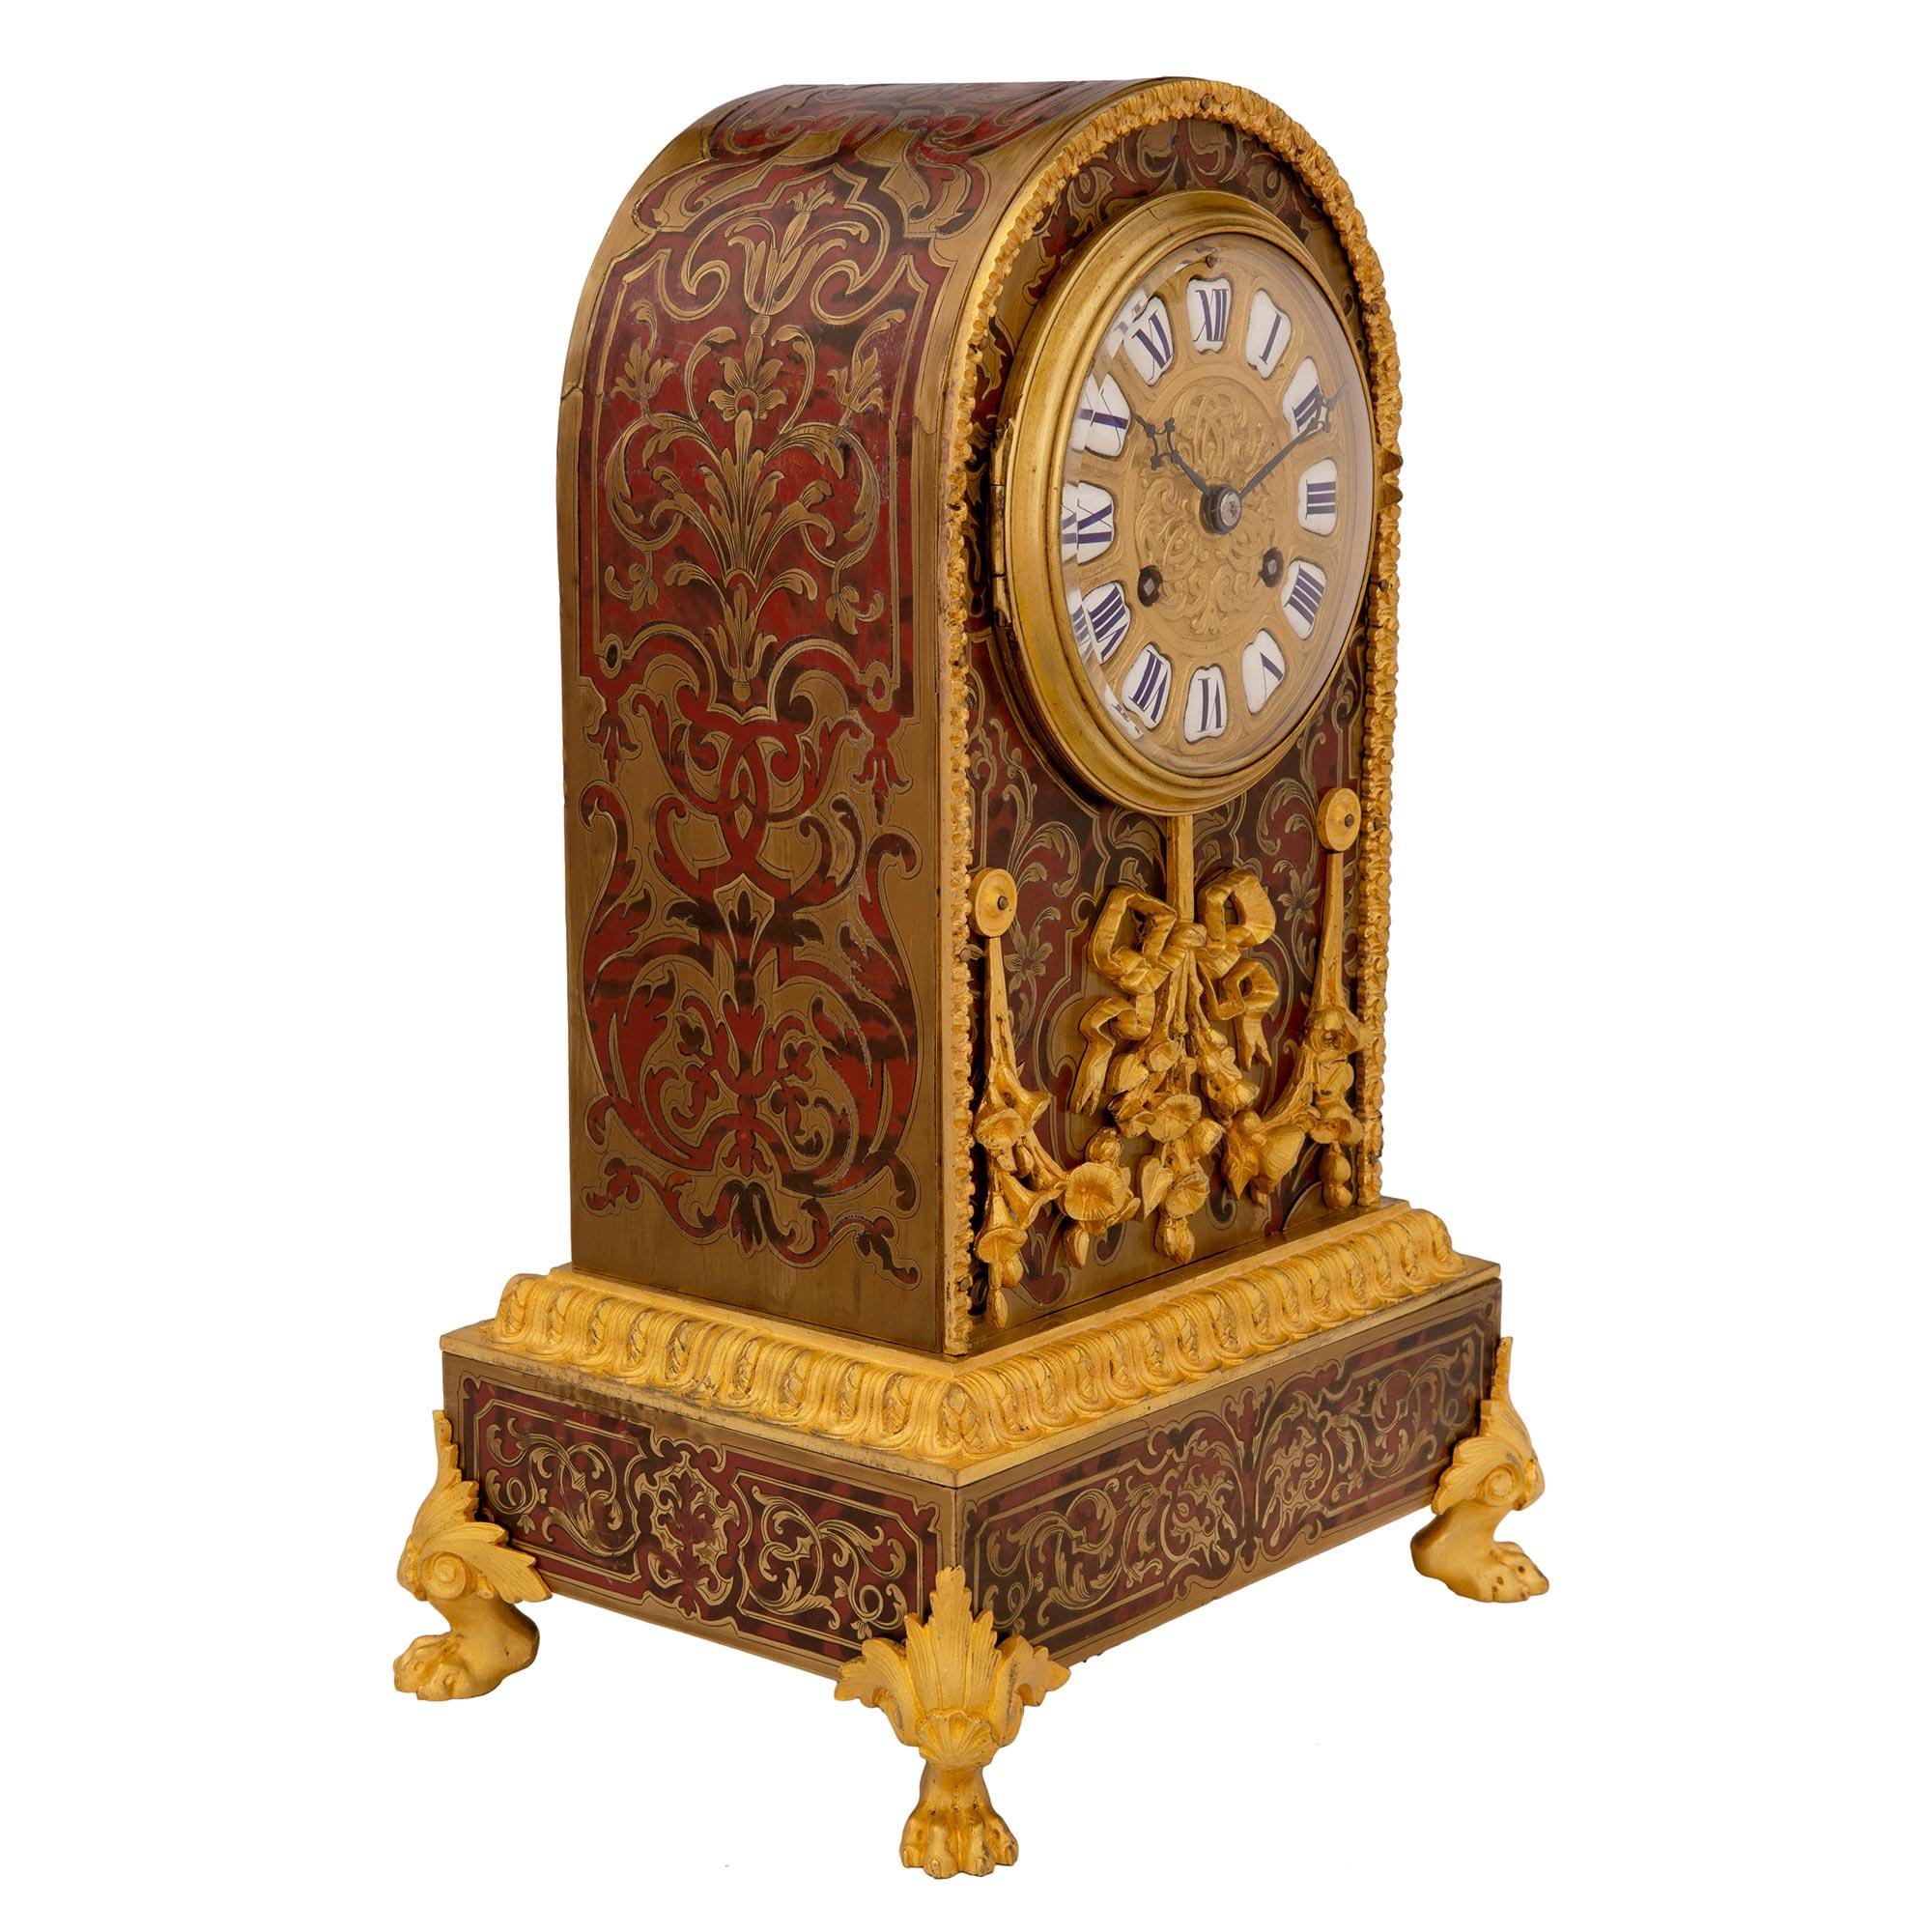 A striking high quality French 19th century Napoleon III period ormolu, tortoiseshell, and brass inlaid Boulle clock. The clock is raised by handsome ormolu paw feet with acanthus leaves below the rectangular base. The base displays stunning